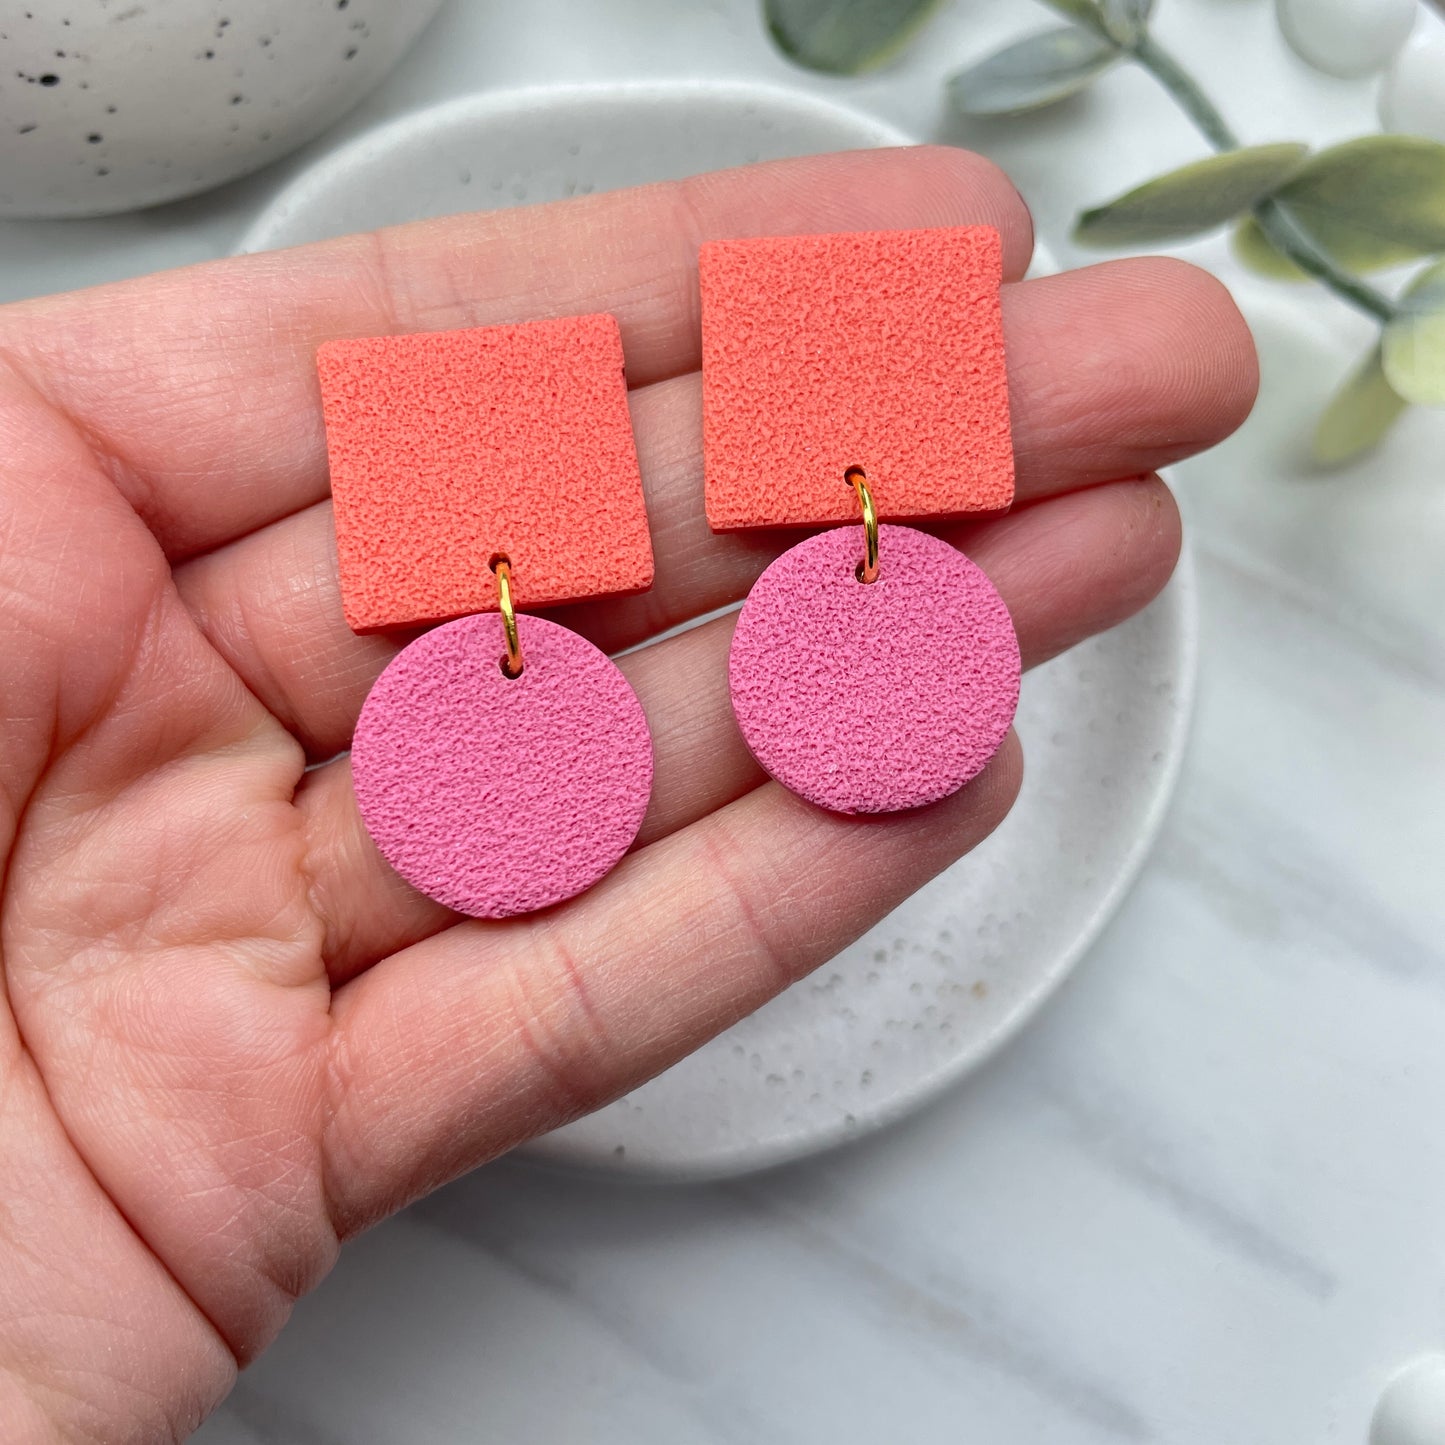 Orange and pink polymer clay dangles